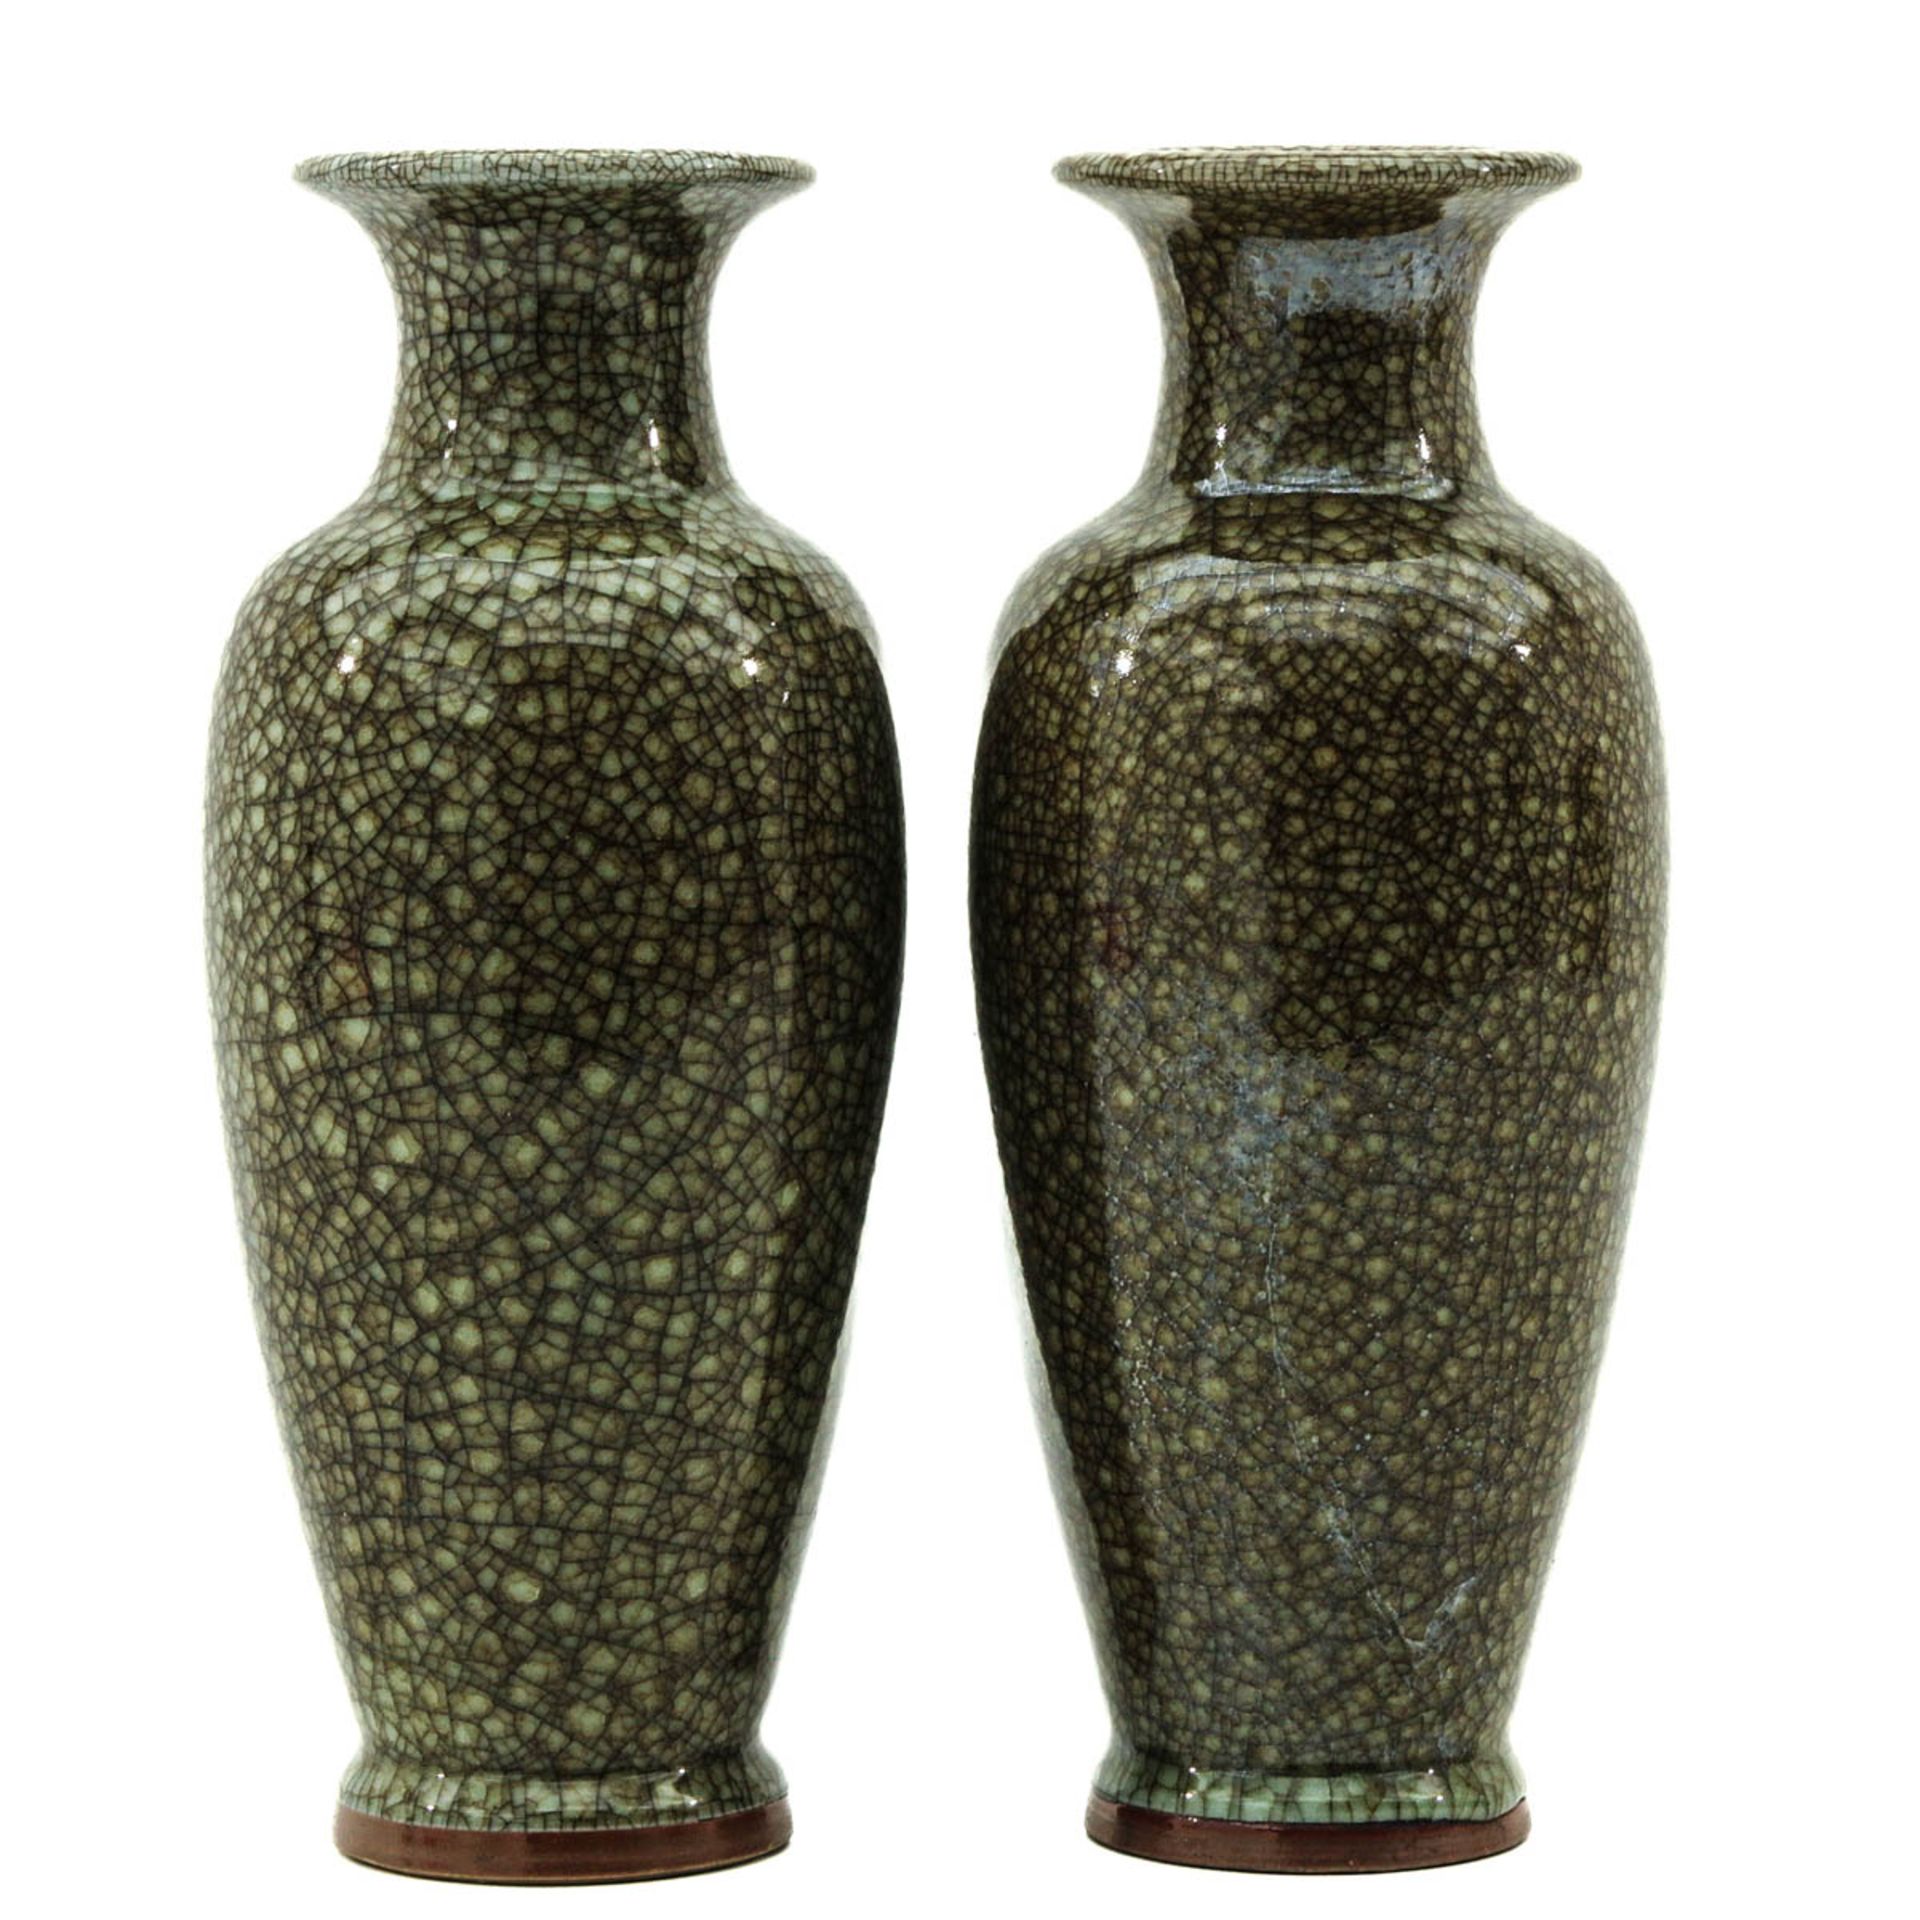 A Pair of Jun Ware Vases - Image 4 of 6